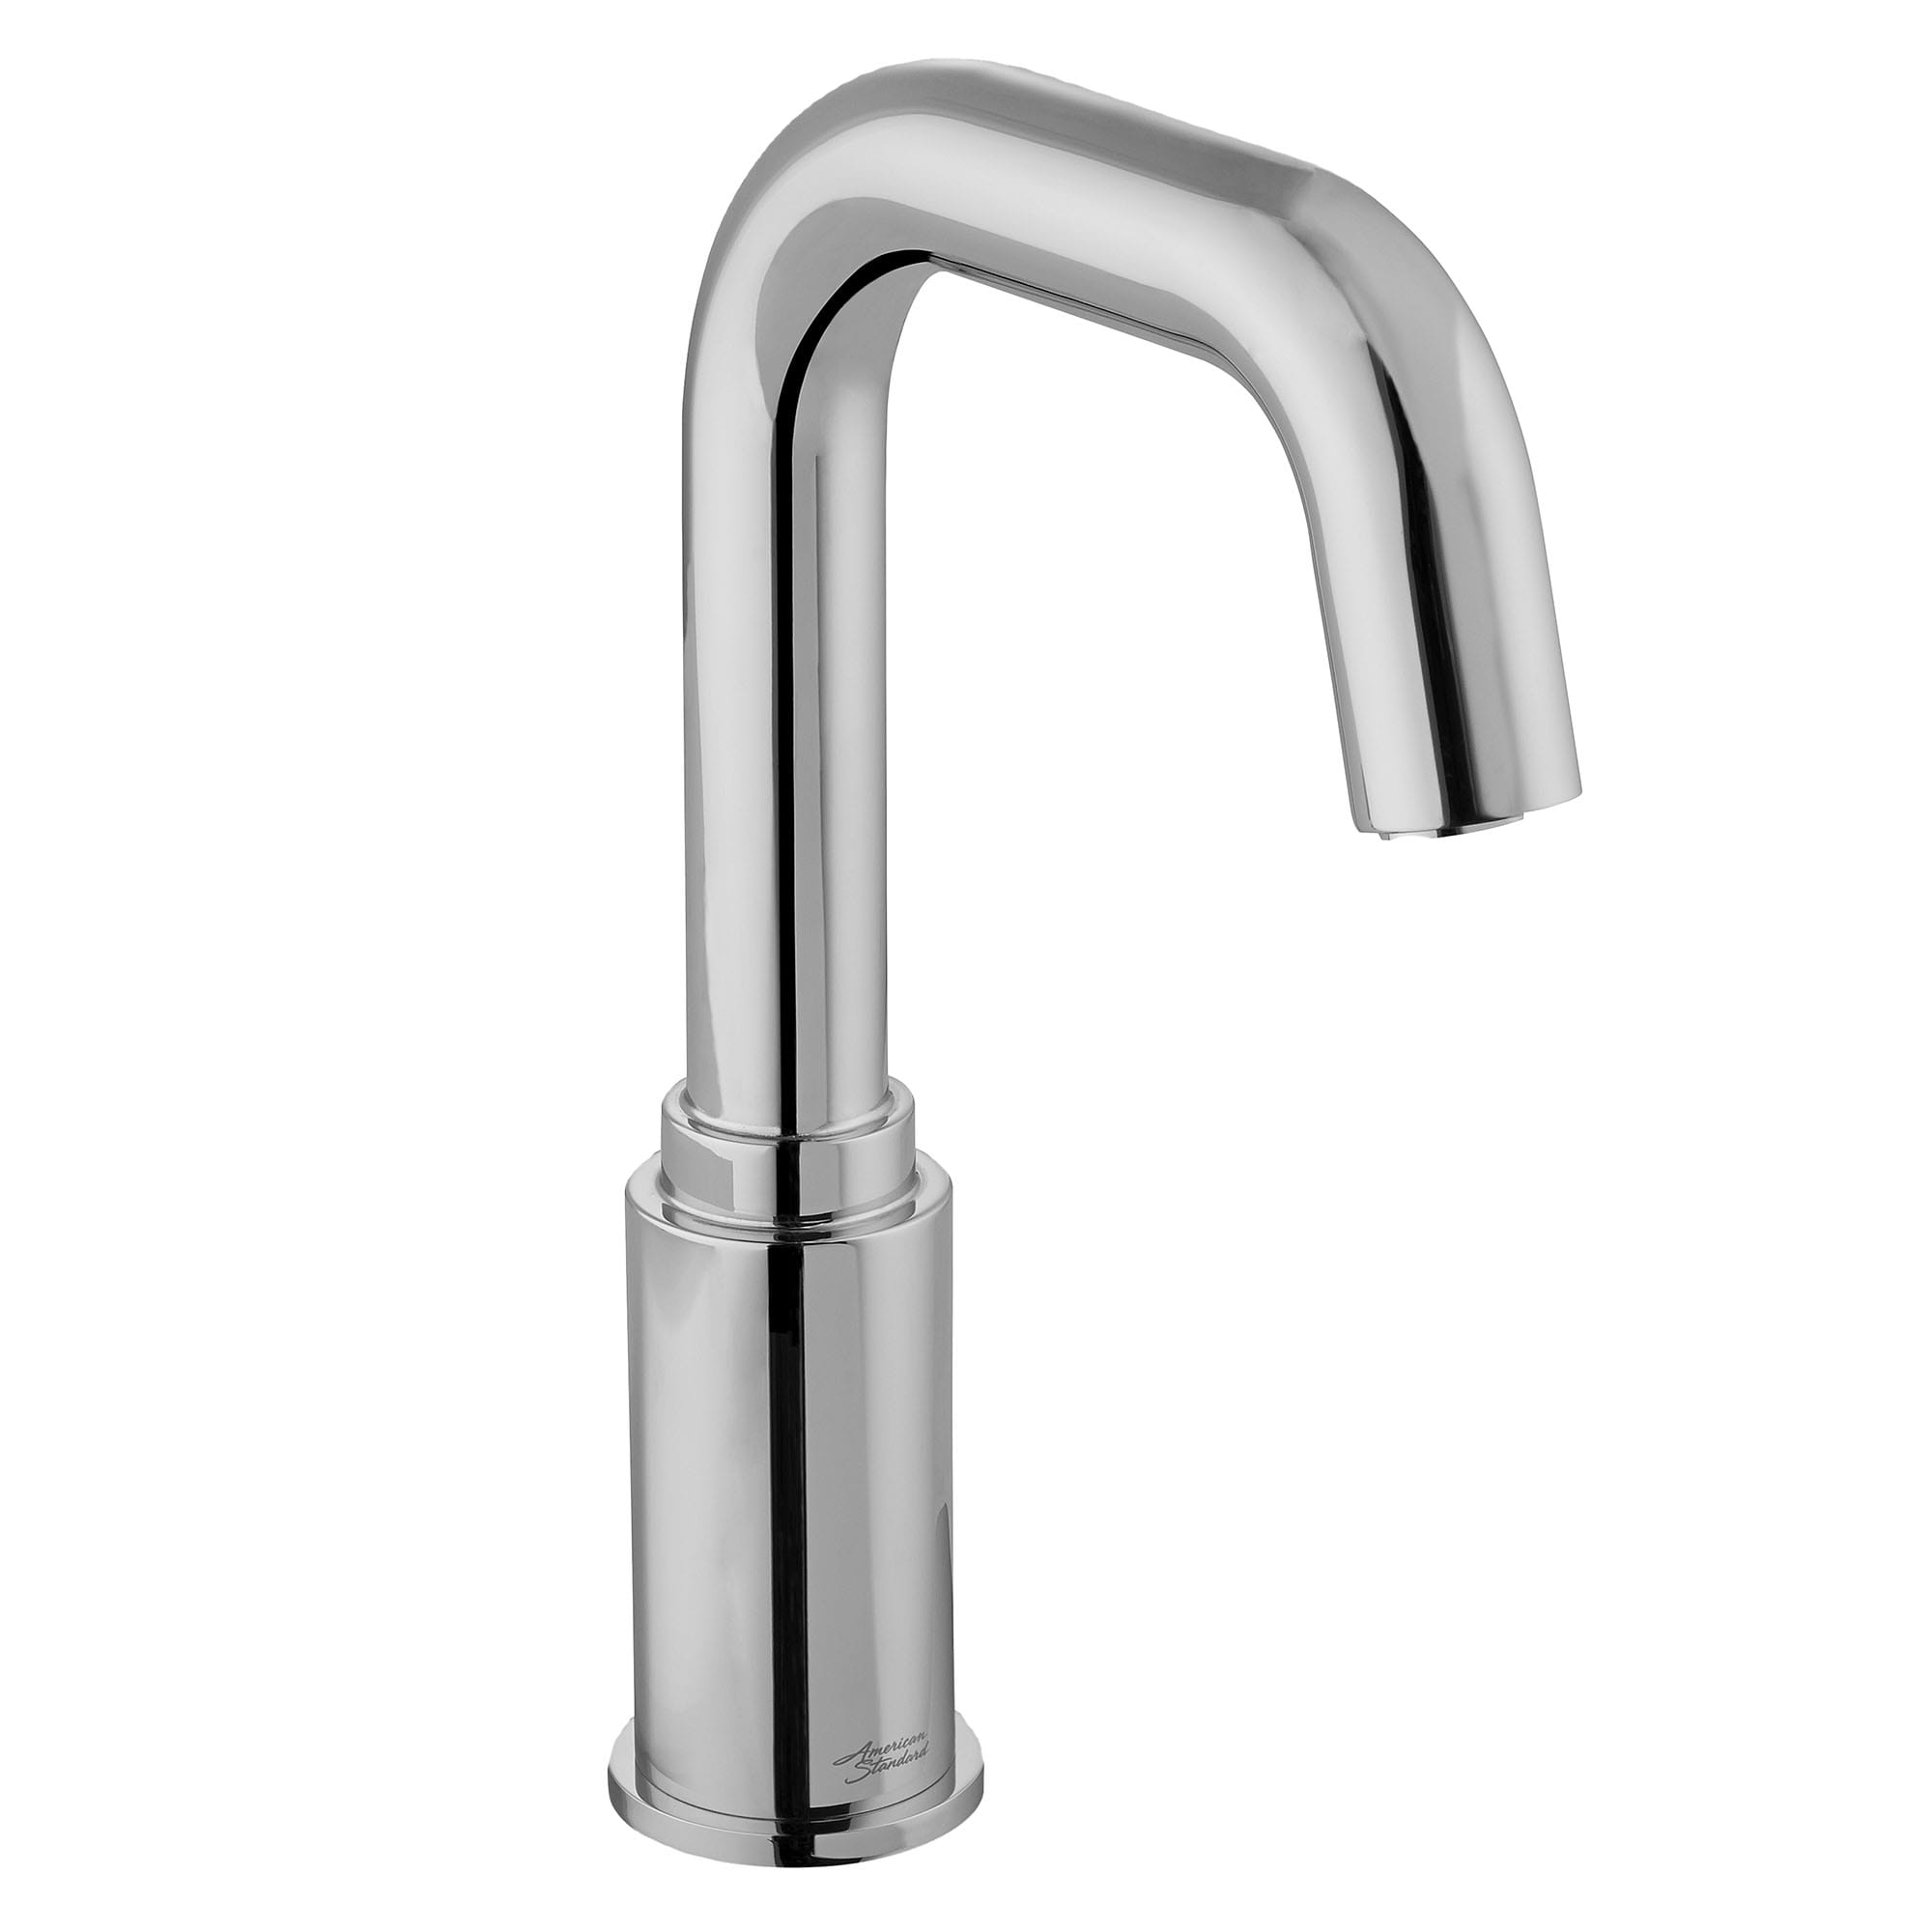 Serin® Touchless Faucet, Base Model, 1.5 gpm/5.7 Lpm